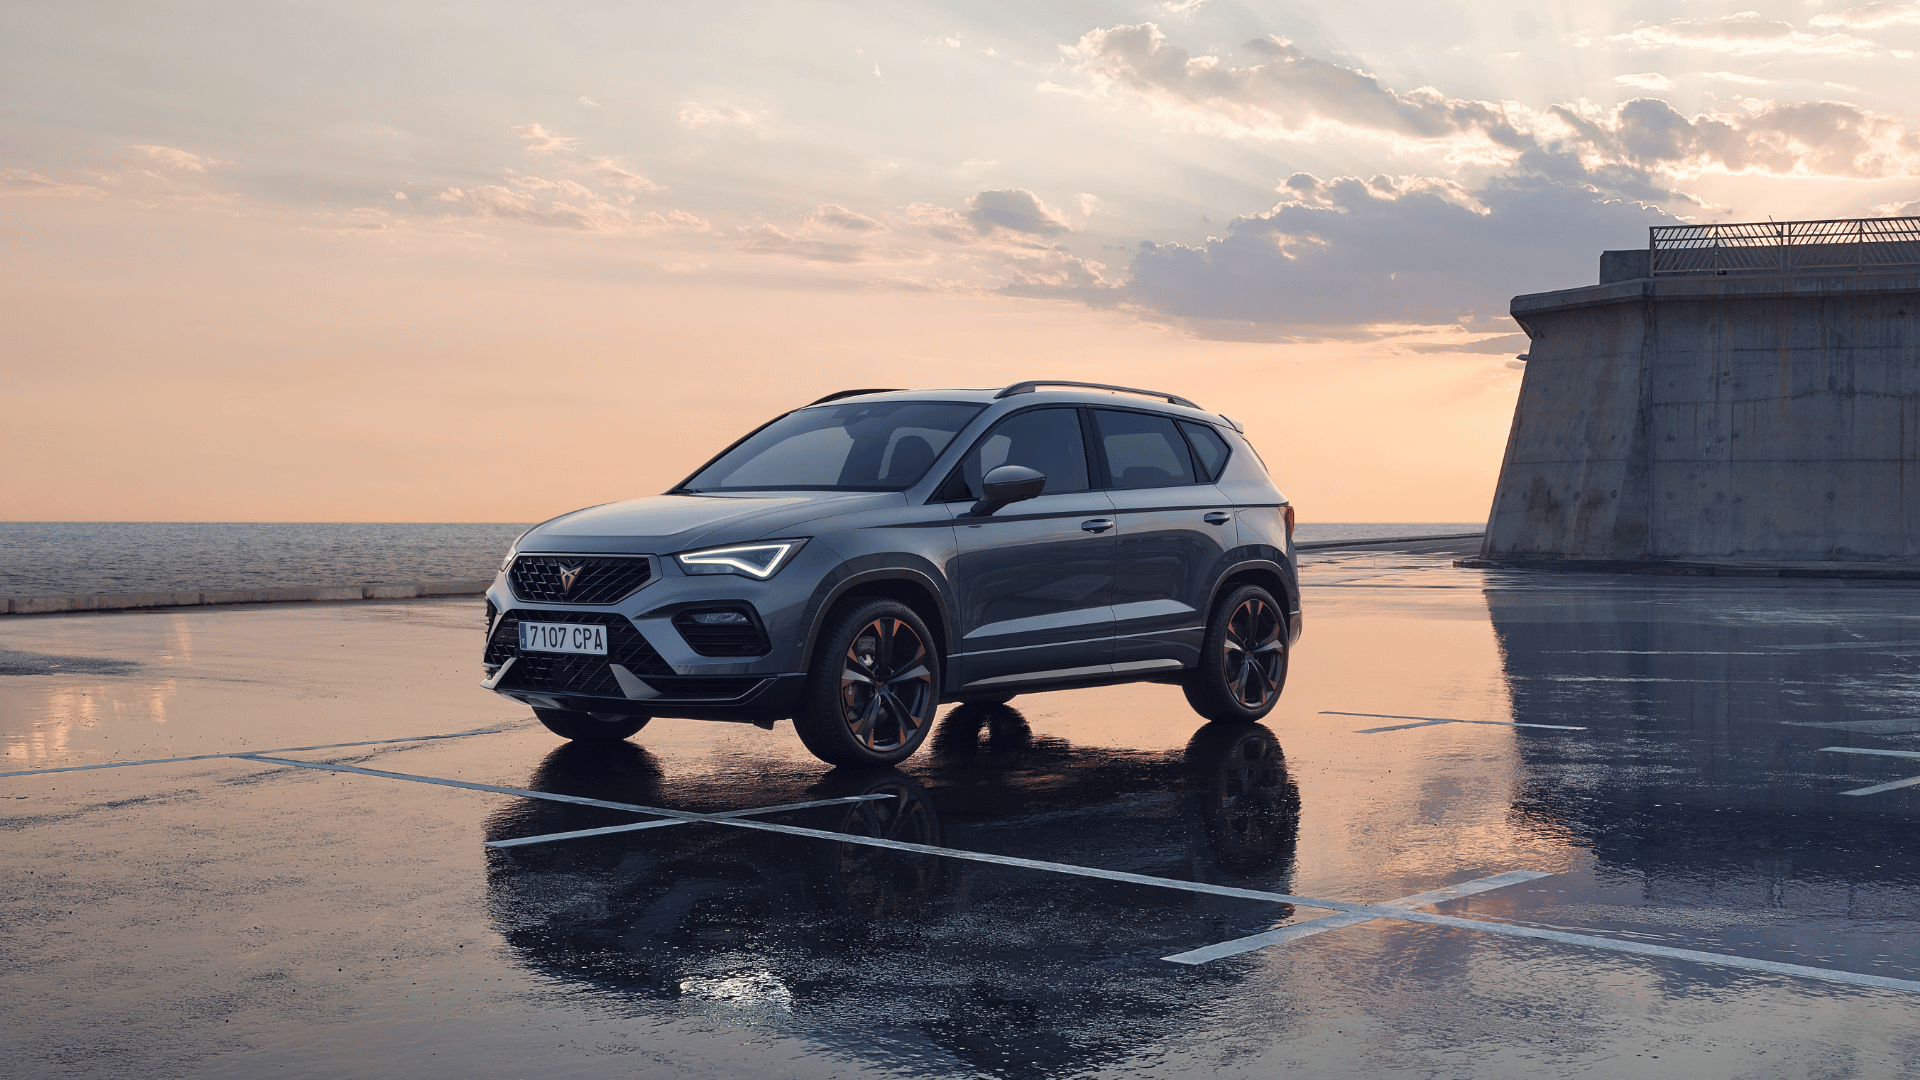 Ateca%20beachside%20with%20sunset%20behind%20in%20grey